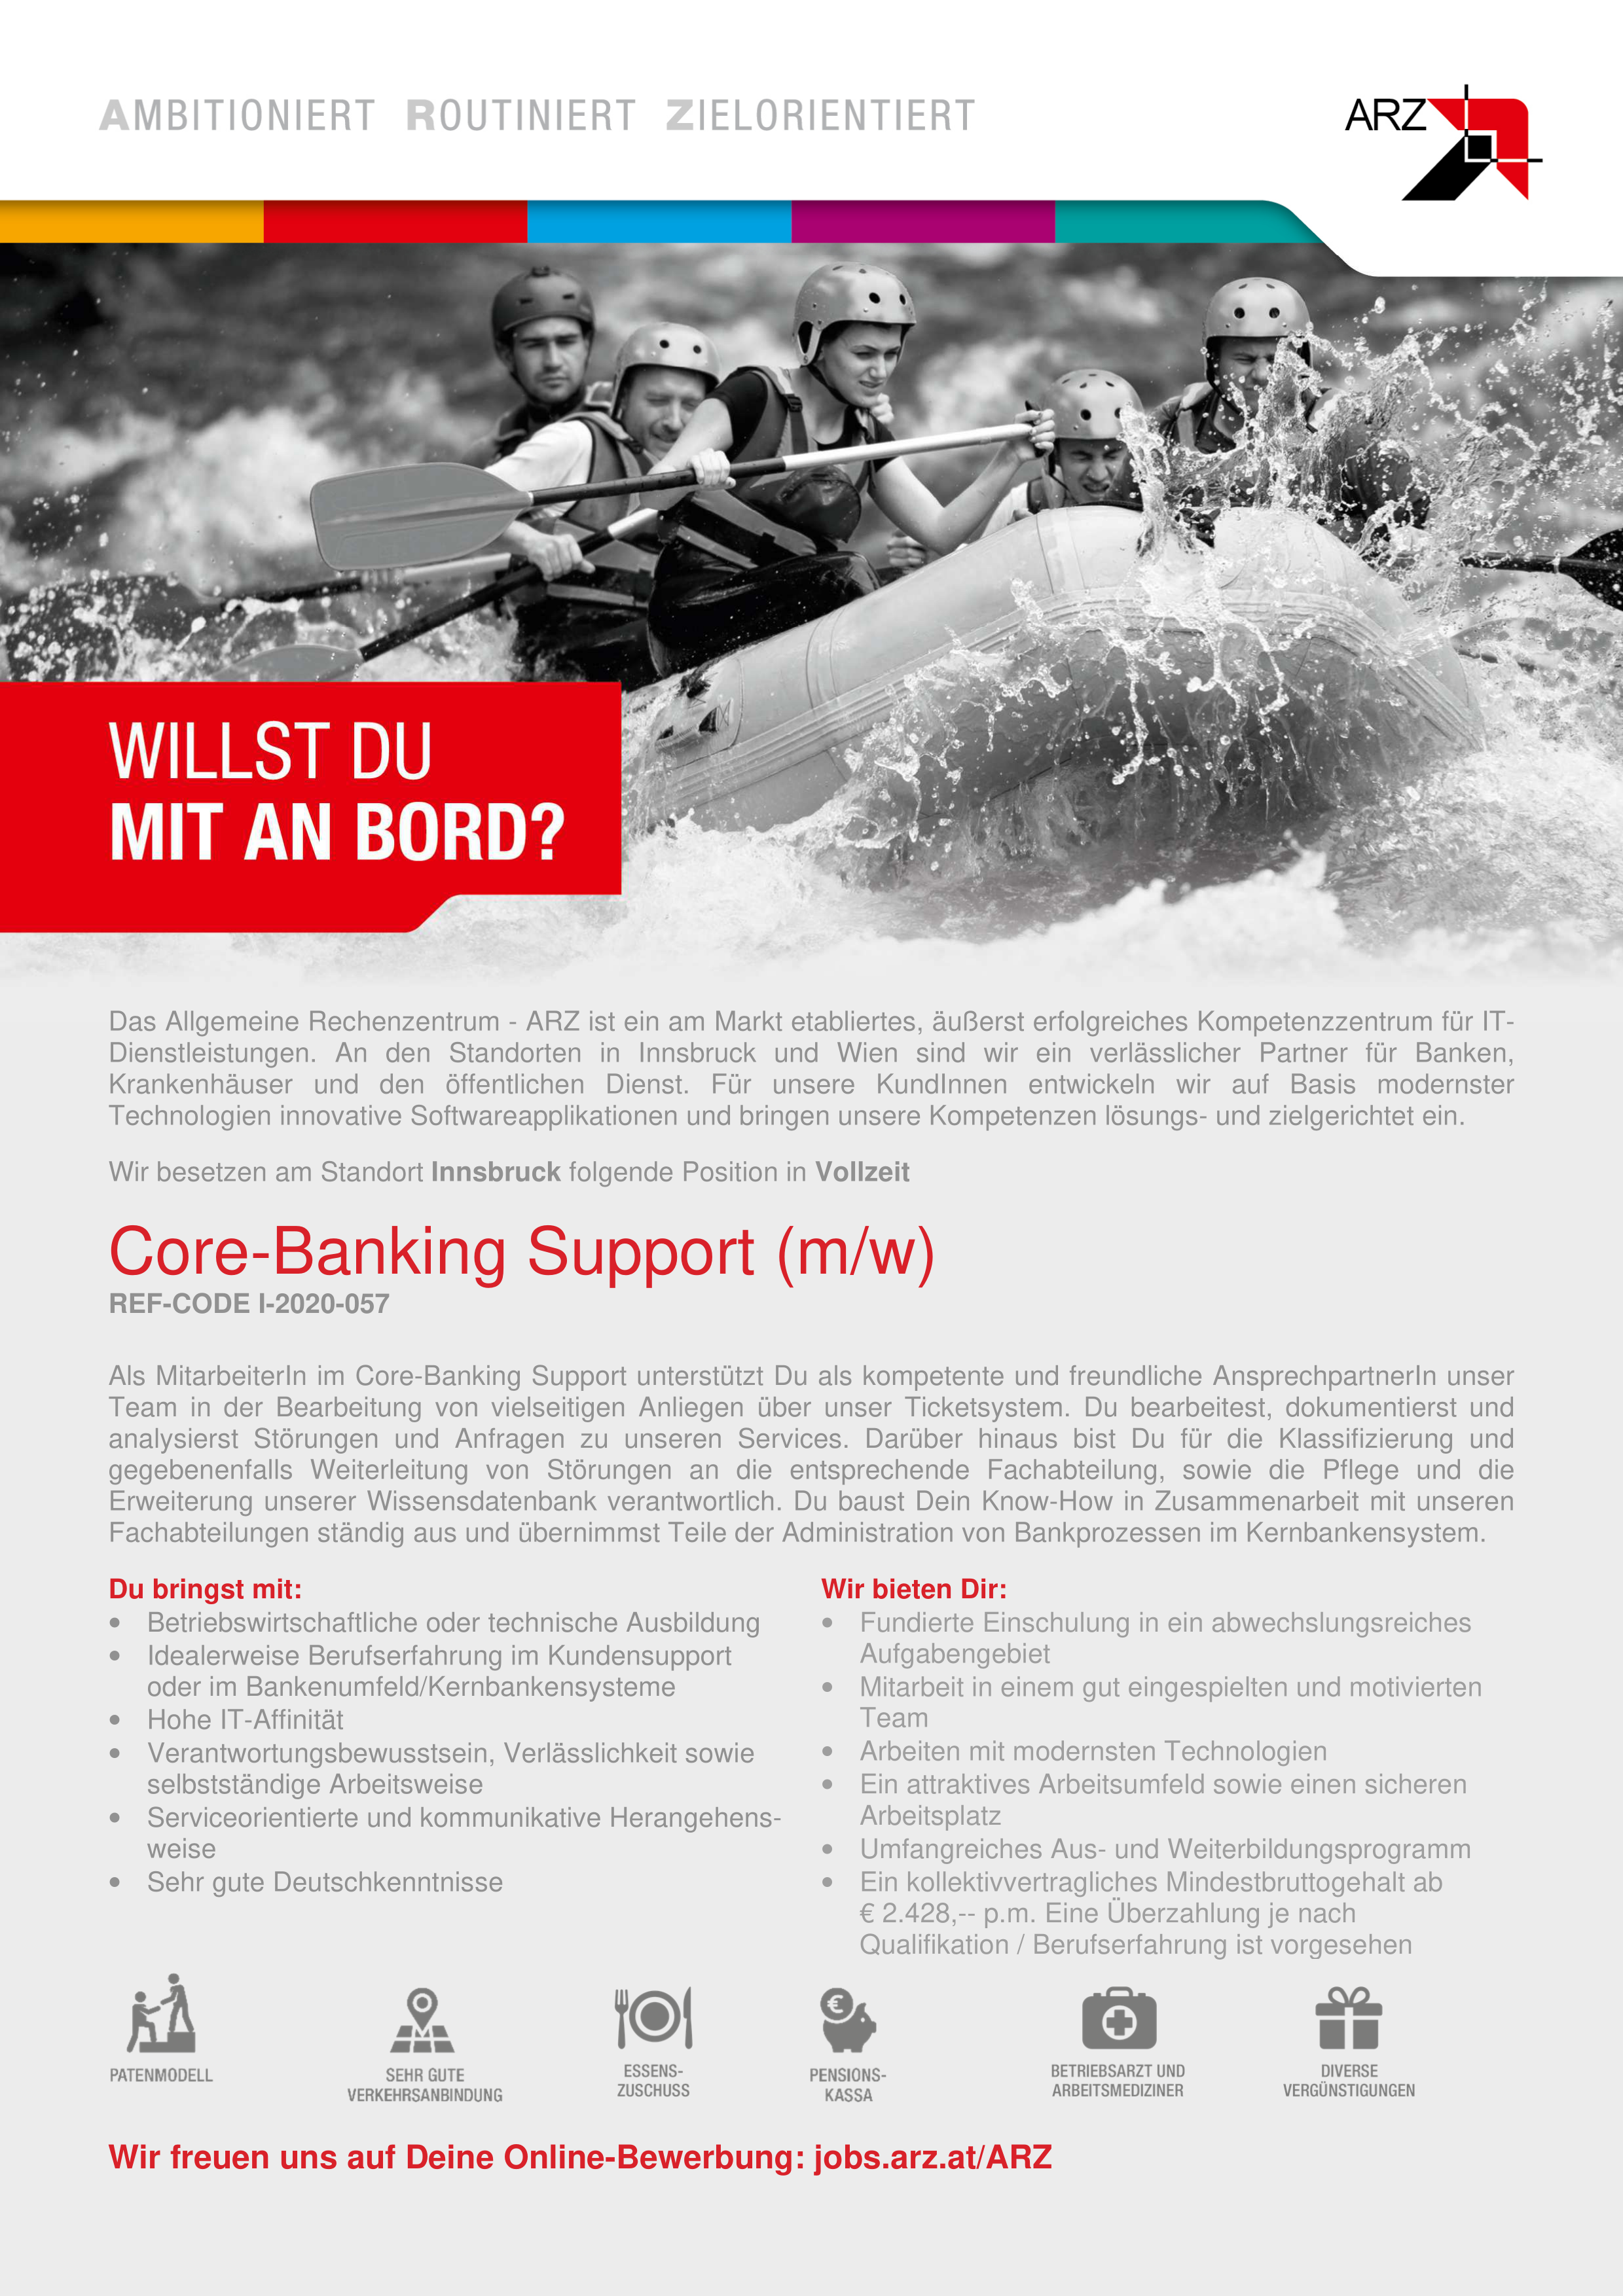 Core-Banking Support (m/w) 